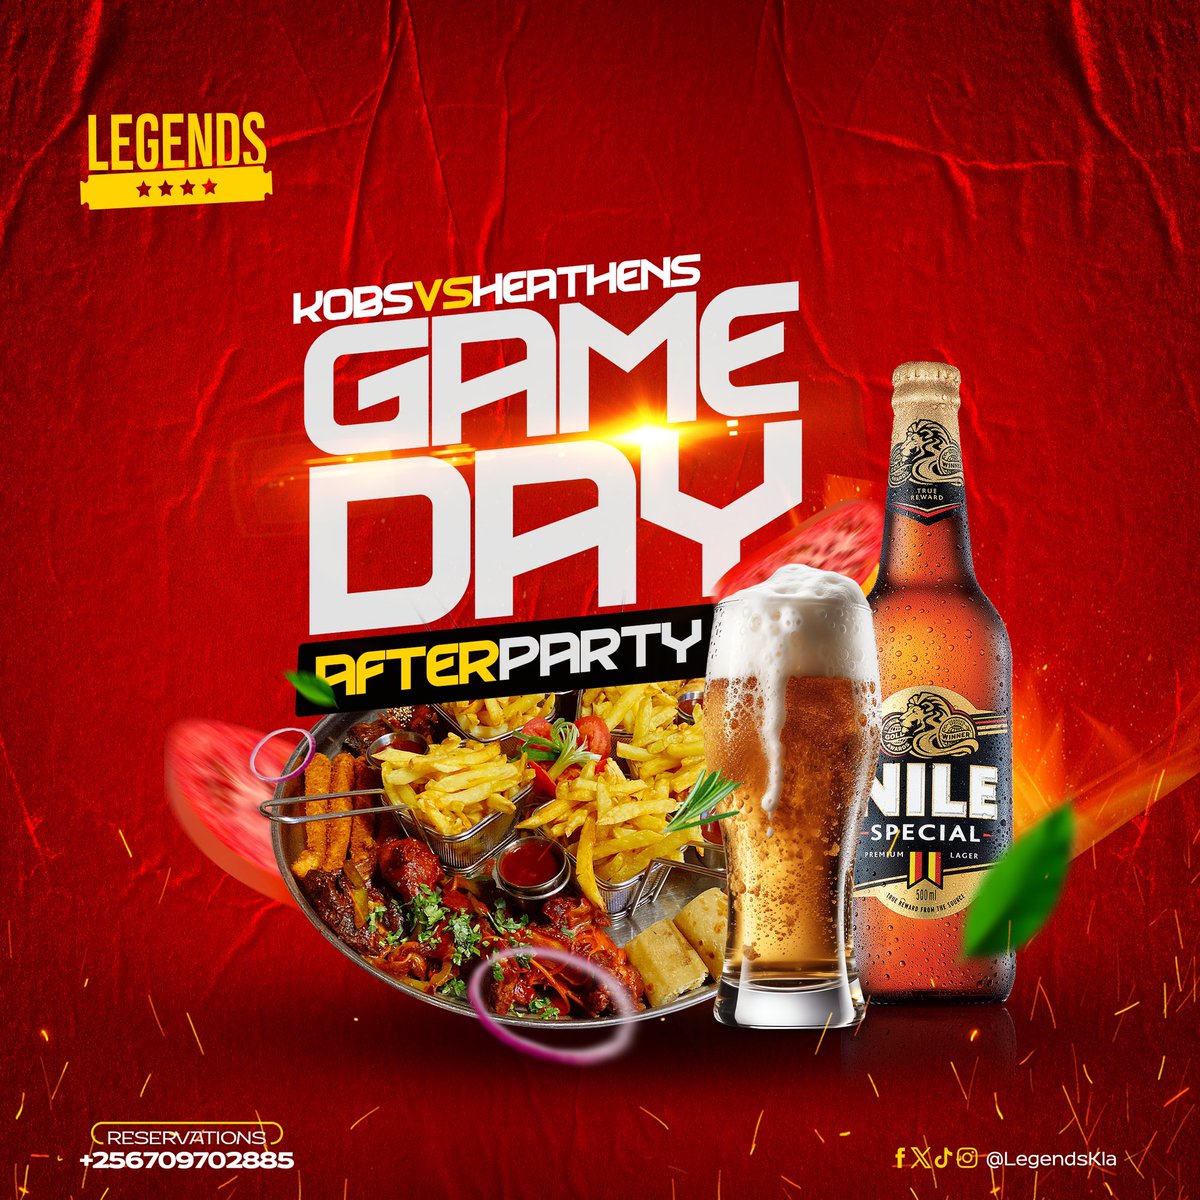 Enjoy unmatched Game Day specials on drinks & treats 🍻😋
See you there !
@KobsrugbyUg Vs @HeathensRFC 
#NileSpecialRugby 
#LegendsGrounds